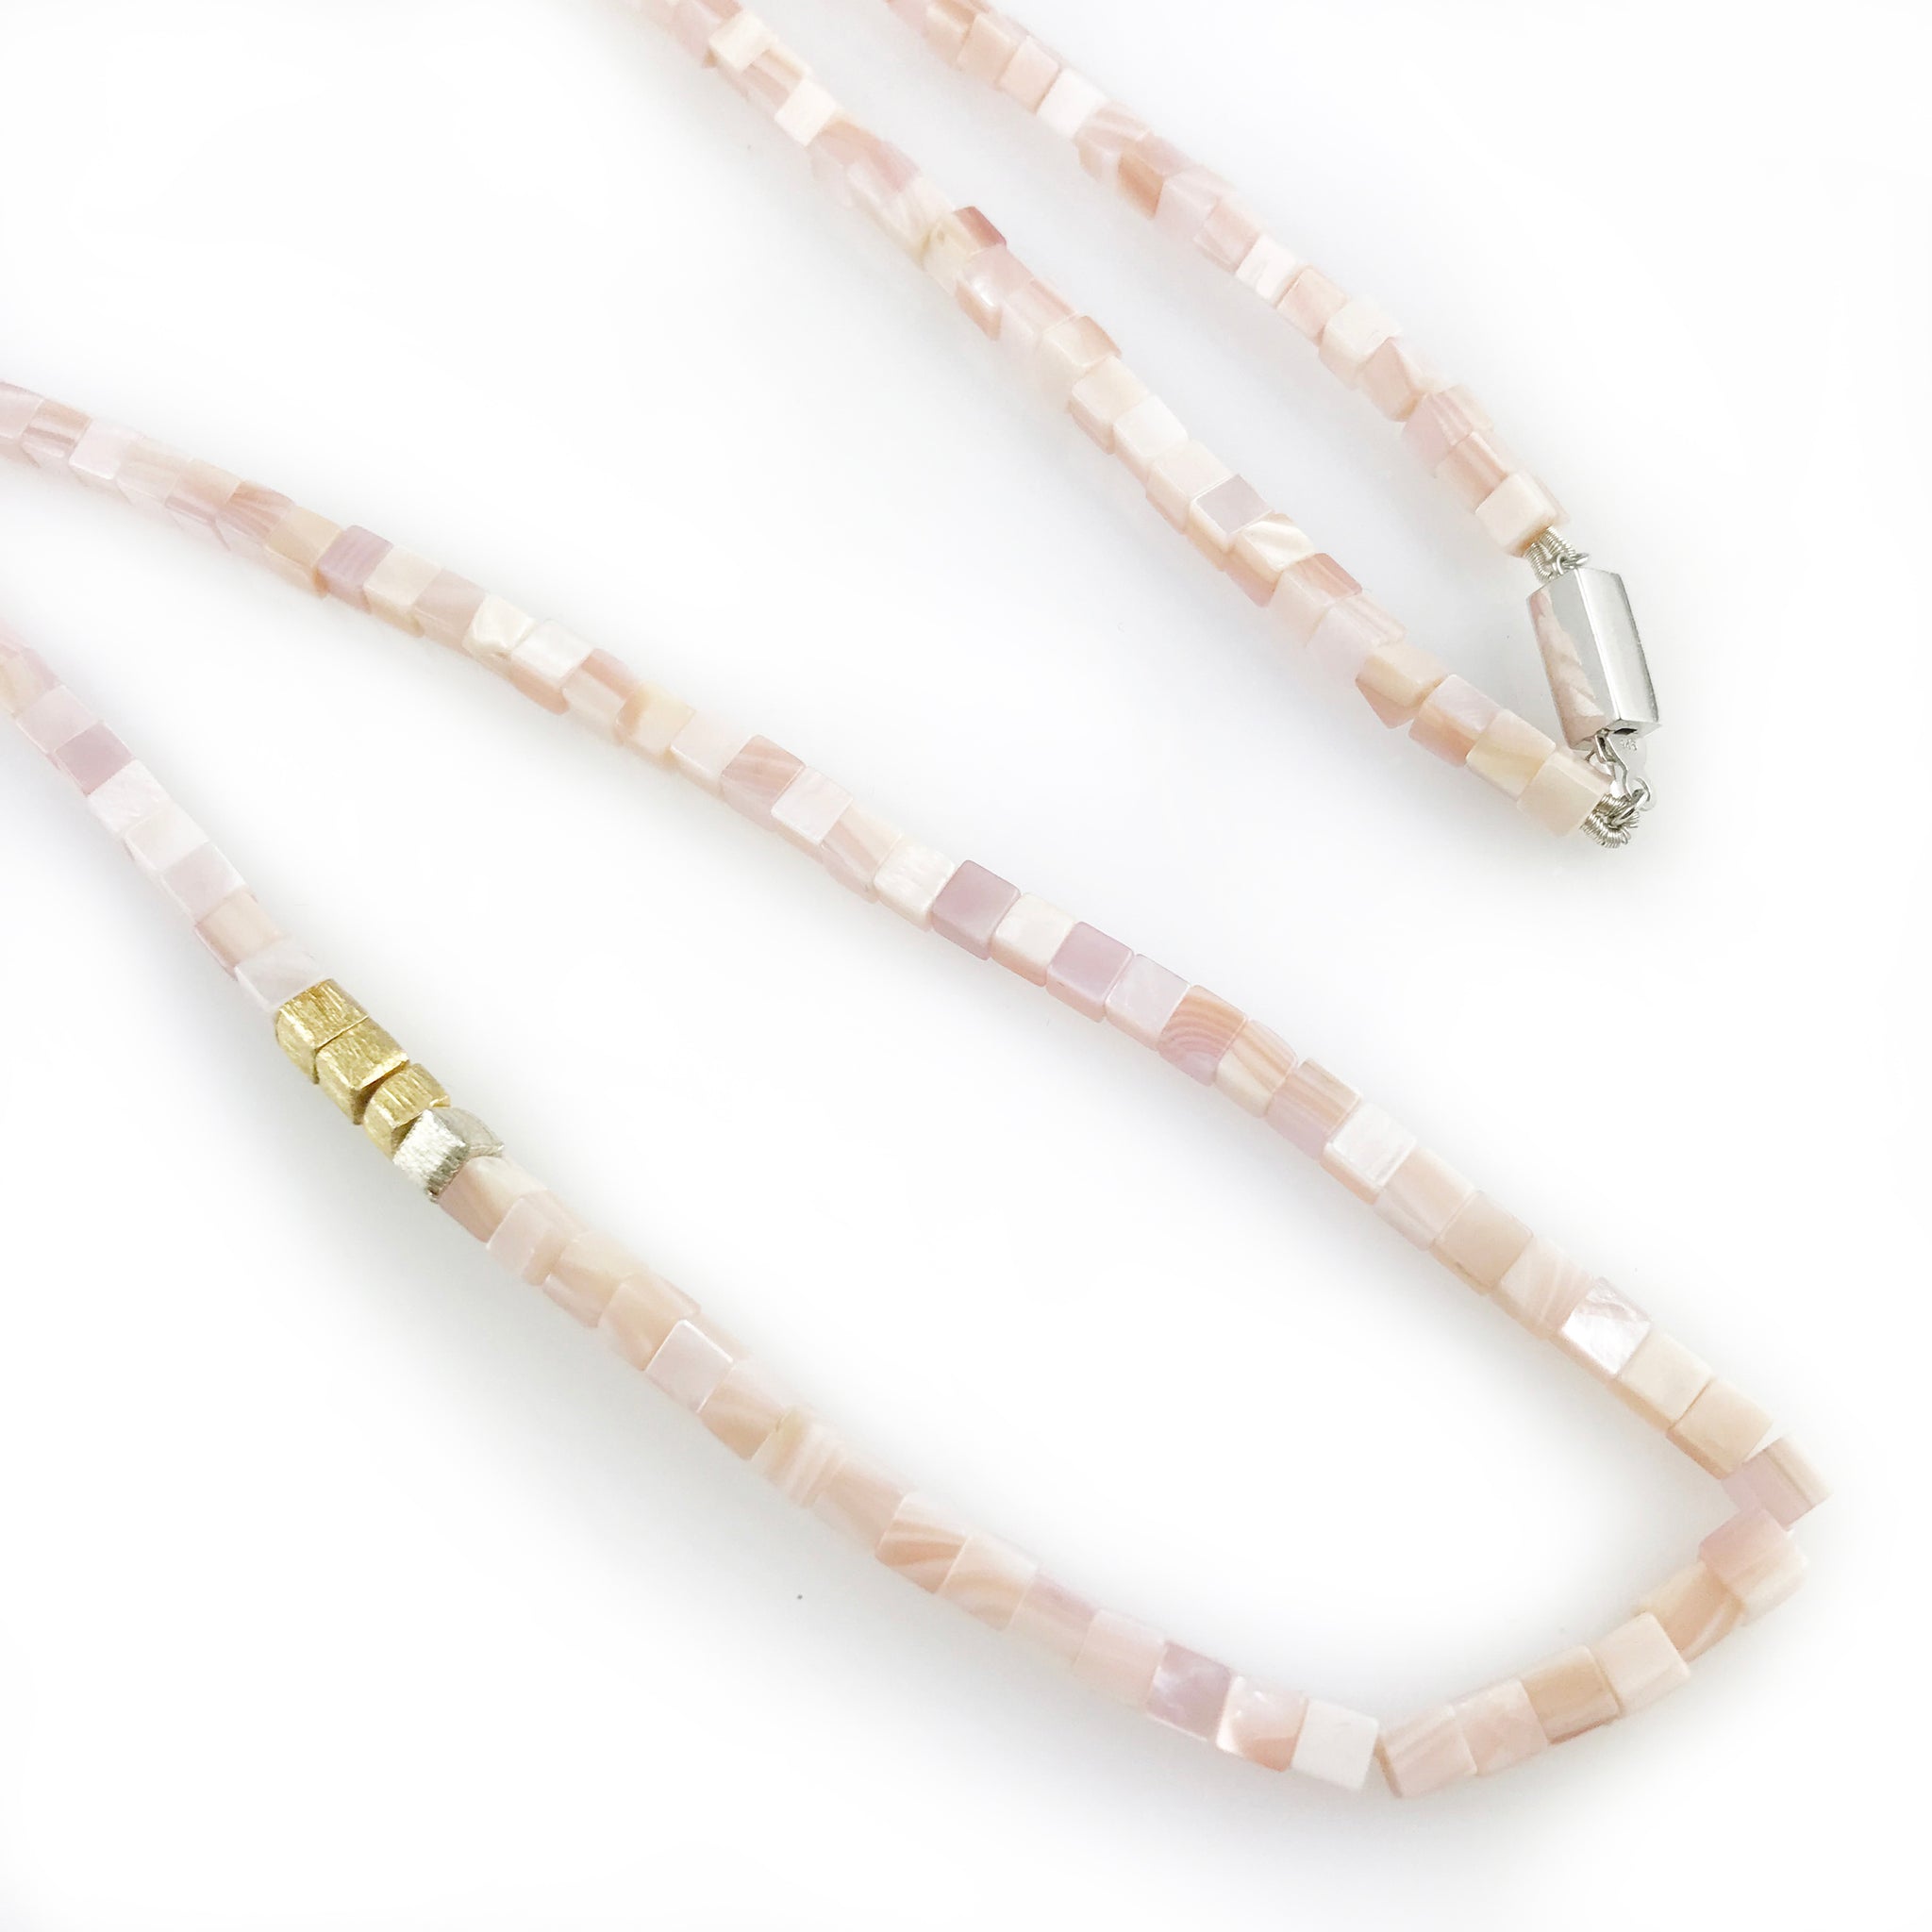 'Pearl Wonder' - pink square mother of pearls necklace